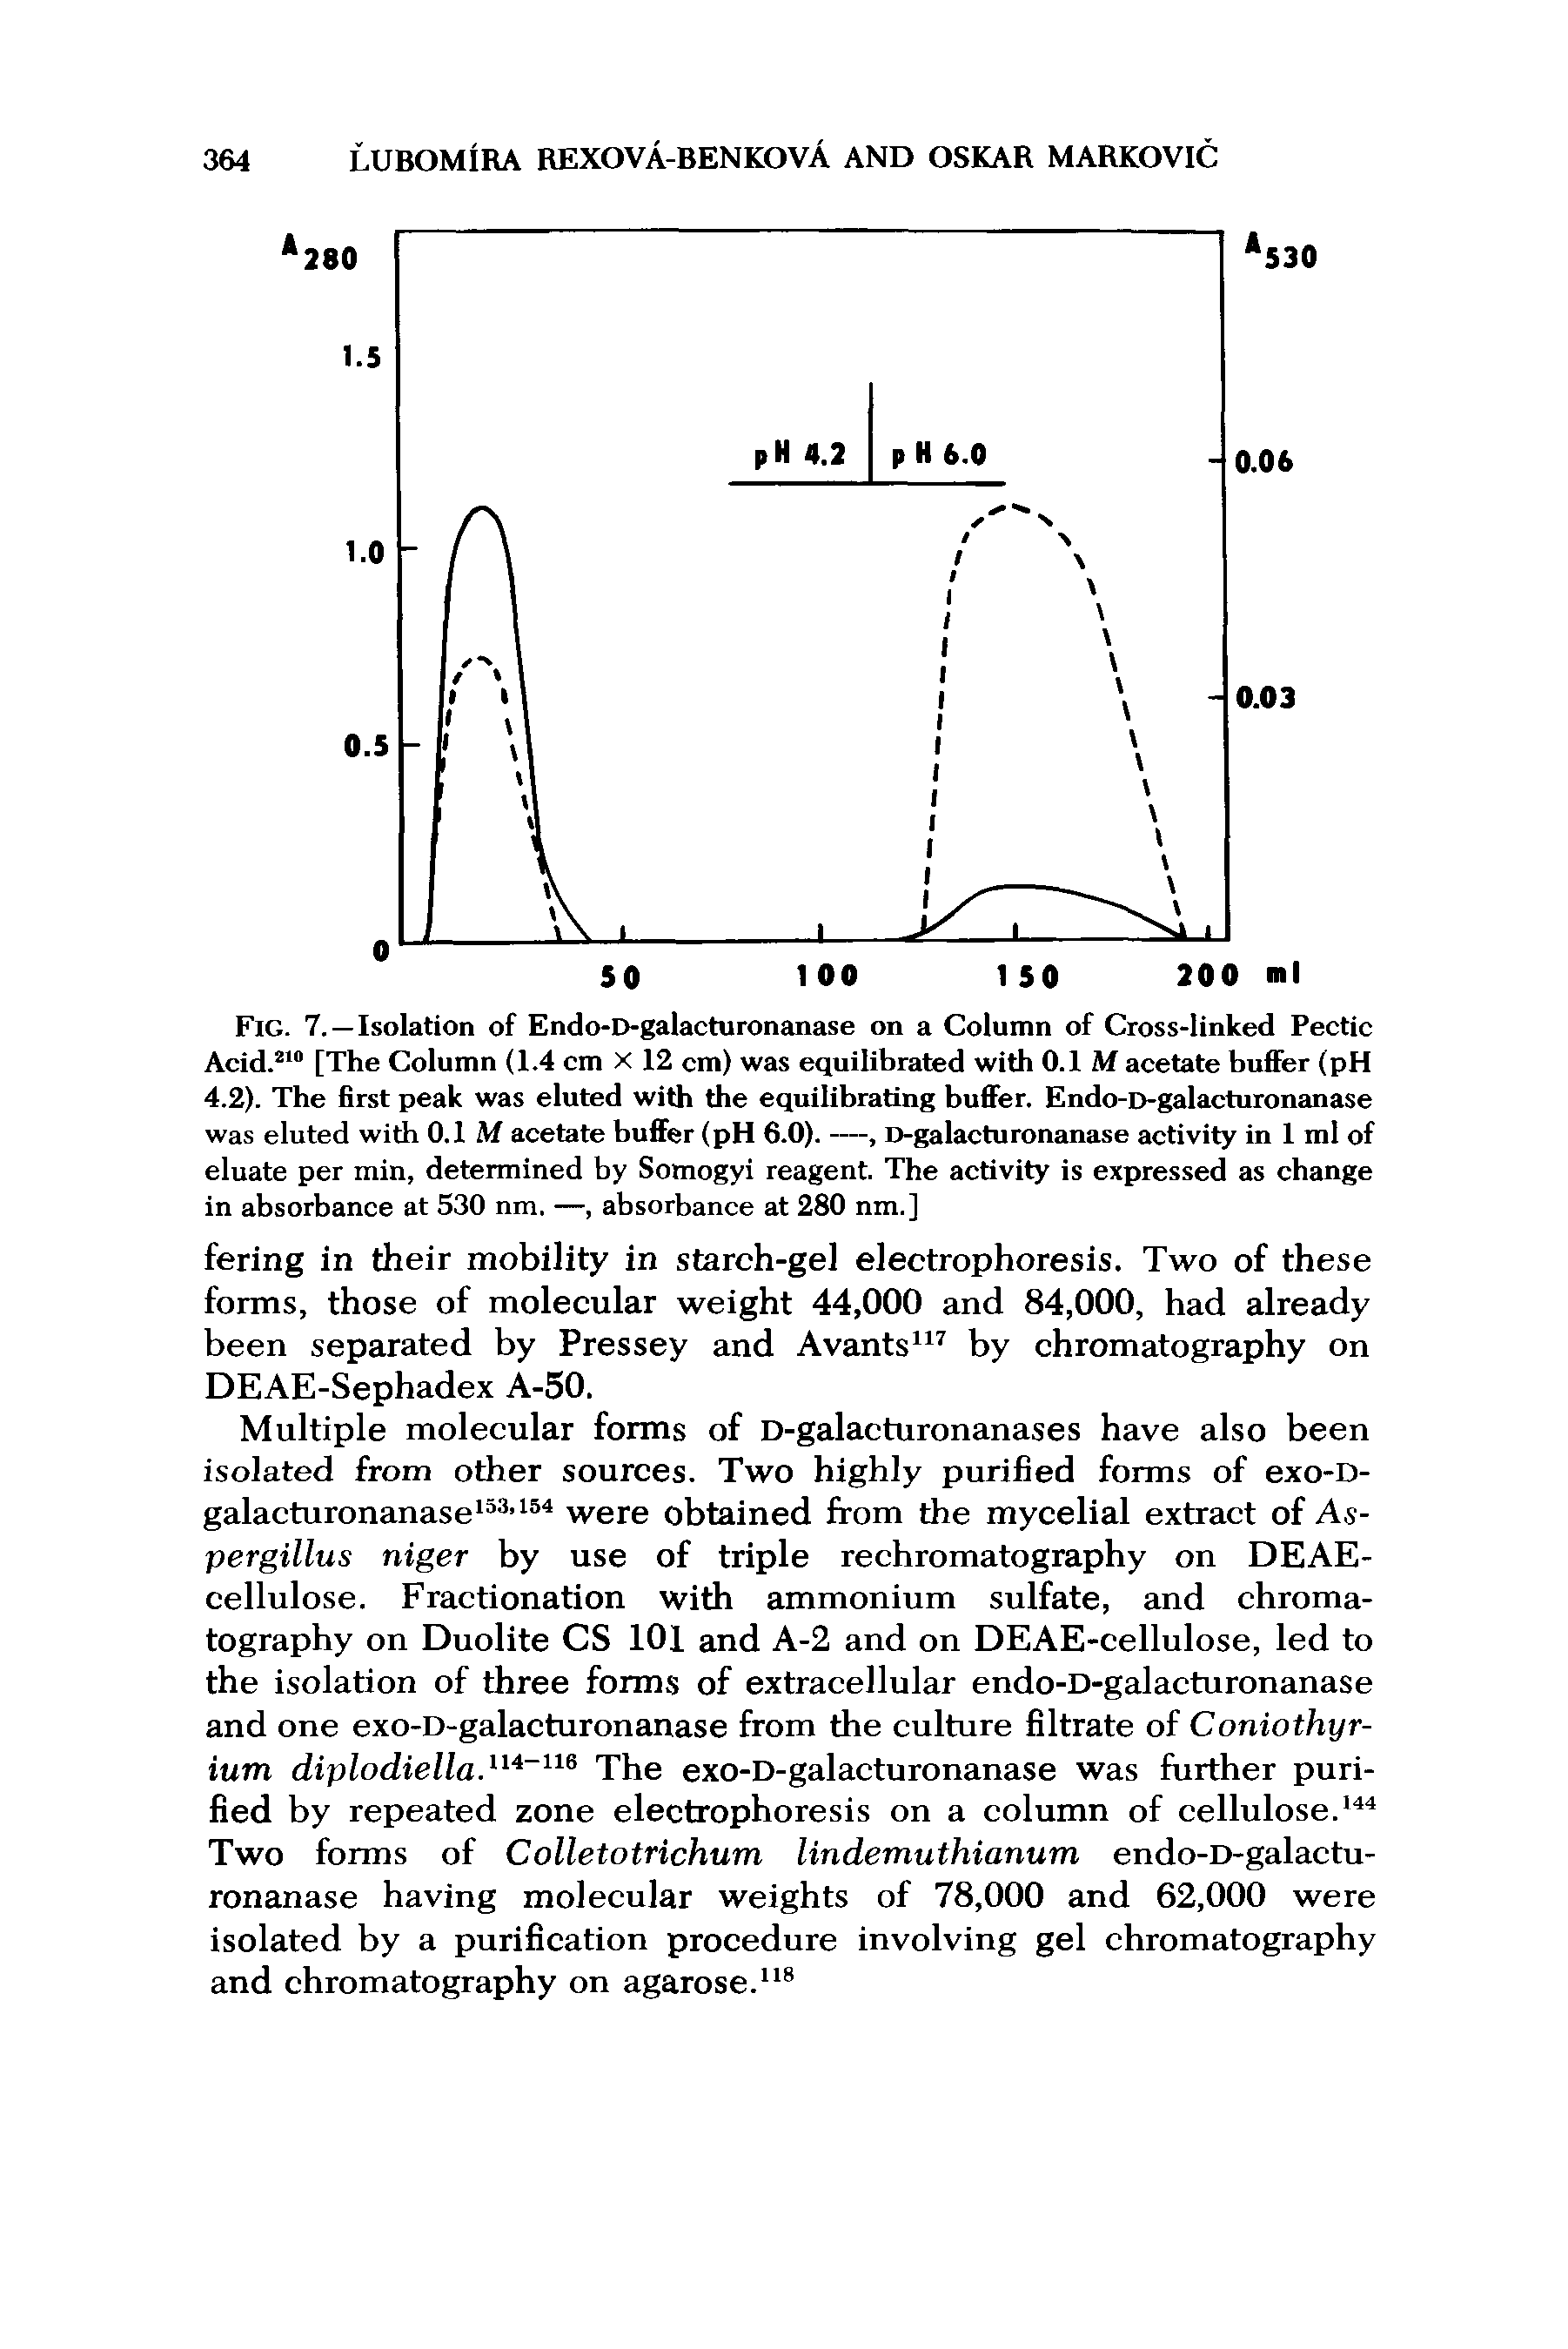 Fig. 7. —Isolation of Endo-D-galacturonanase on a Column of Cross-linked Pectic Acid.210 [The Column (1.4 cm X 12 cm) was equilibrated with 0.1 M acetate buffer (pH 4.2). The first peak was eluted with the equilibrating buffer. Endo-D-galacturonanase was eluted with 0.1 M acetate buffer (pH 6.0). —, D-galacturonanase activity in 1 ml of eluate per min, determined by Somogyi reagent. The activity is expressed as change in absorbance at 530 nm, —, absorbance at 280 nm.]...